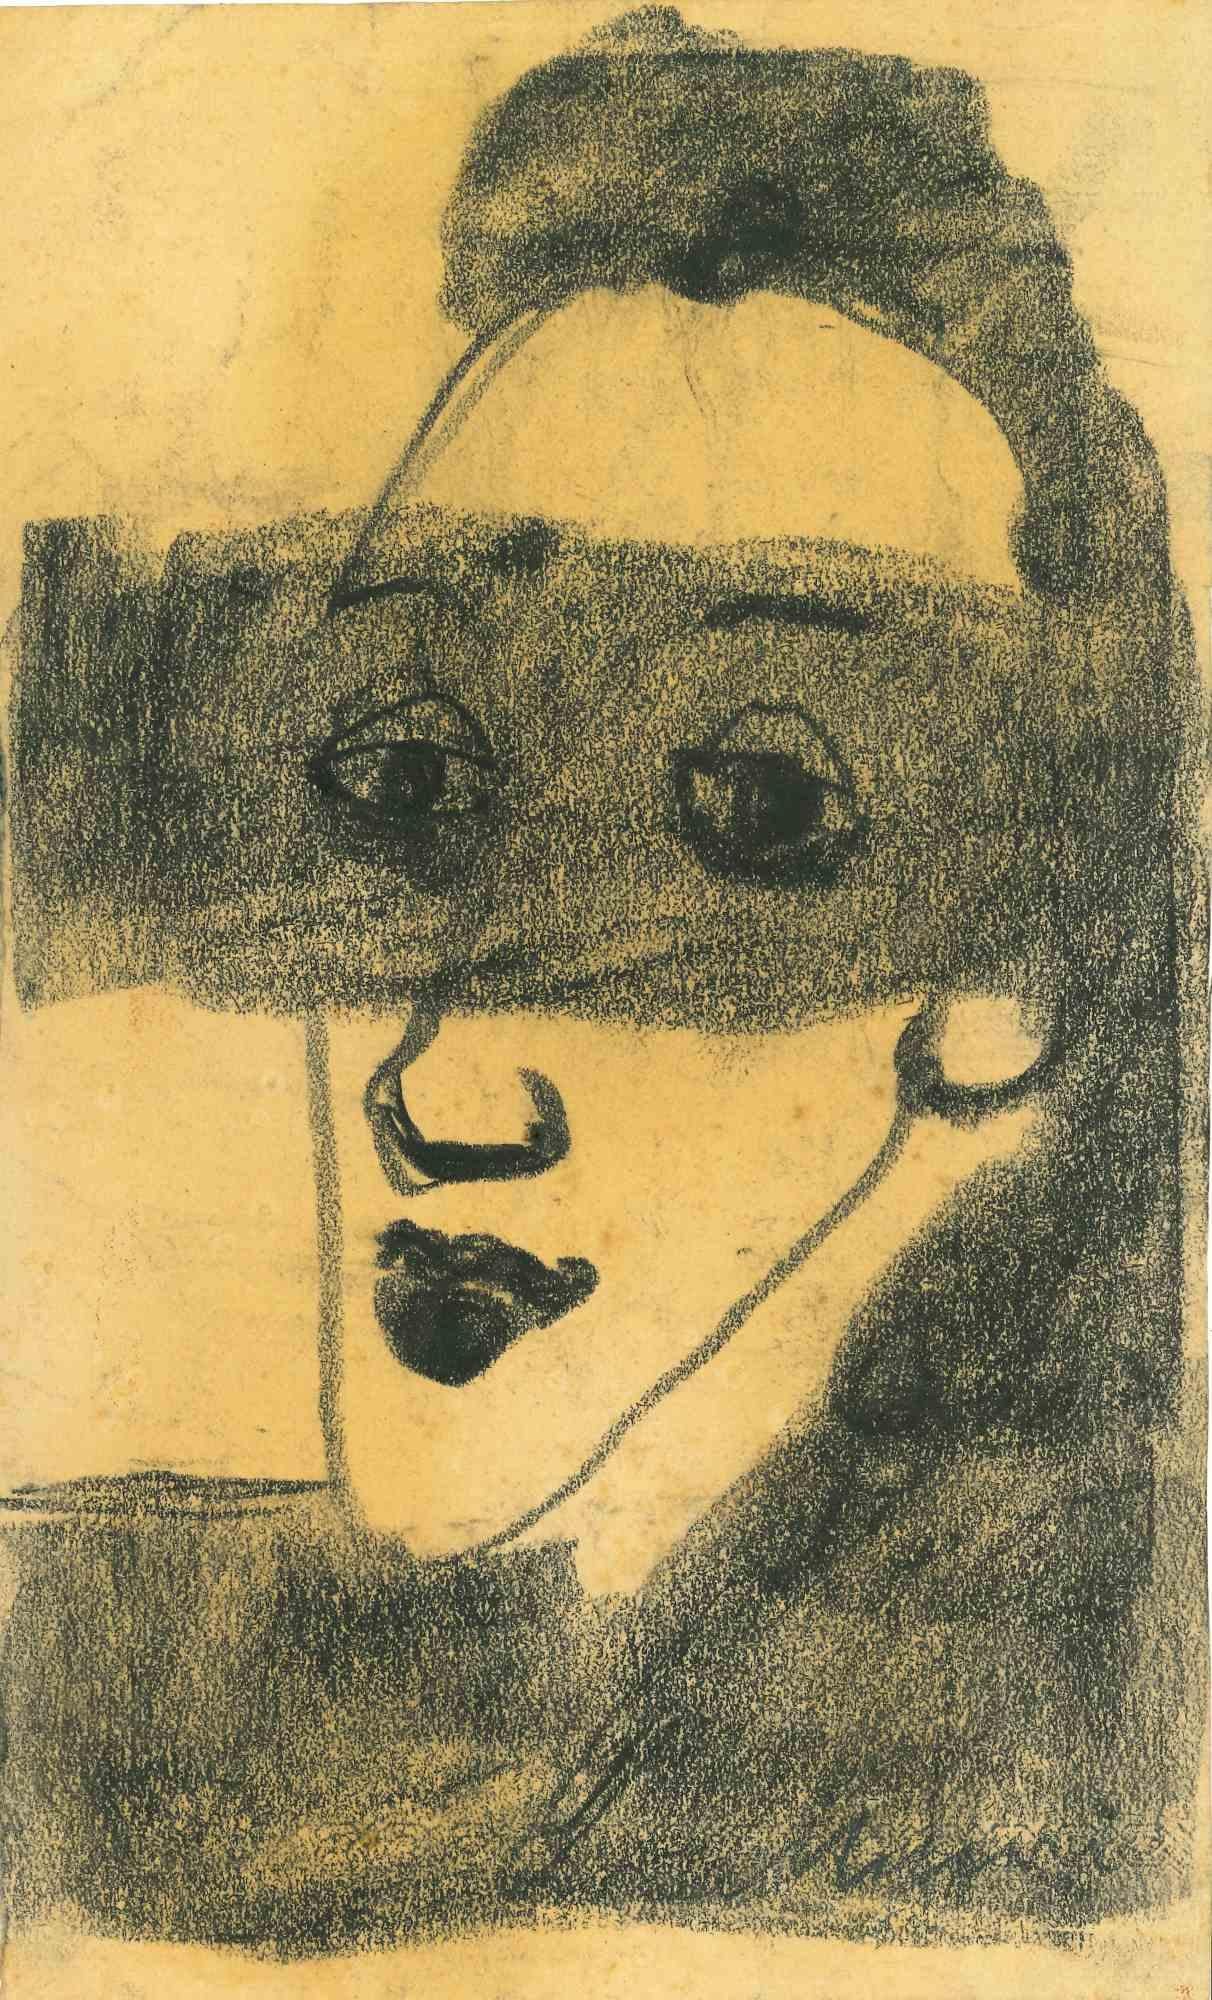 Portrait is a charcoal drawing realized by Mino Maccari  (1924-1989) in the Mid-20th Century.

Hand-signed.

Good conditions with slight foxing.

Mino Maccari (Siena, 1924-Rome, June 16, 1989) was an Italian writer, painter, engraver and journalist,